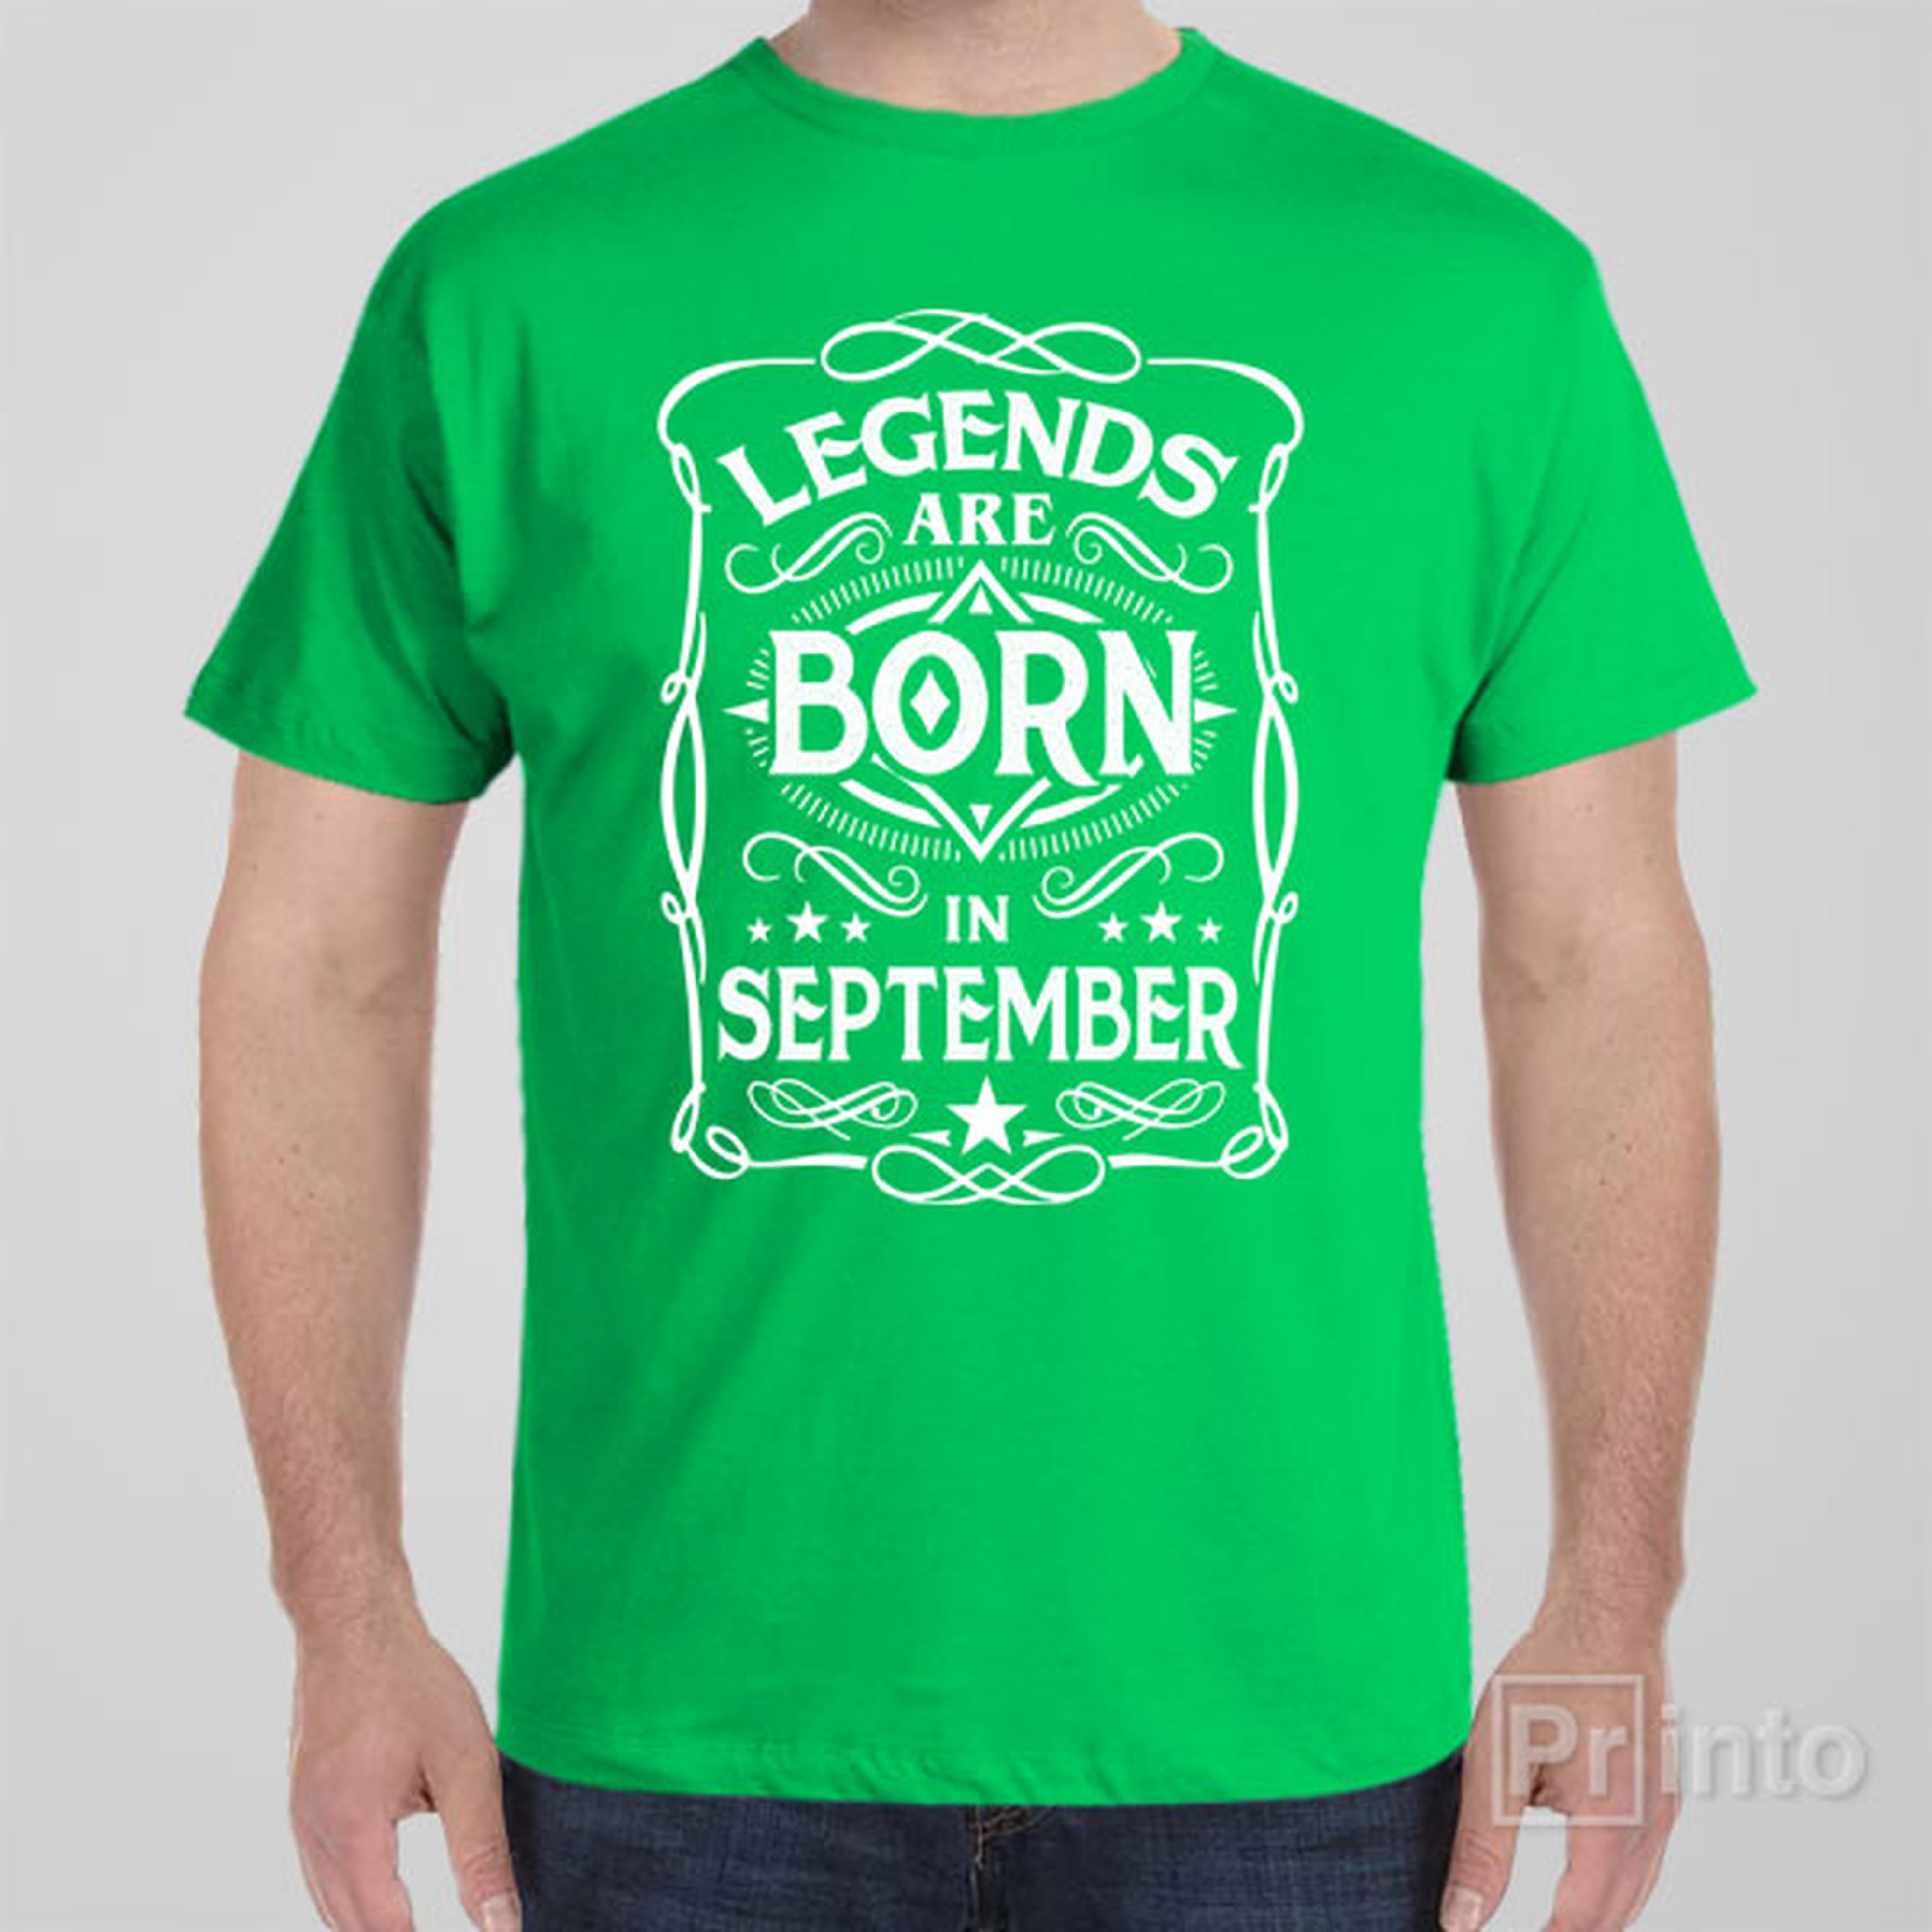 legends-are-born-in-september-t-shirt